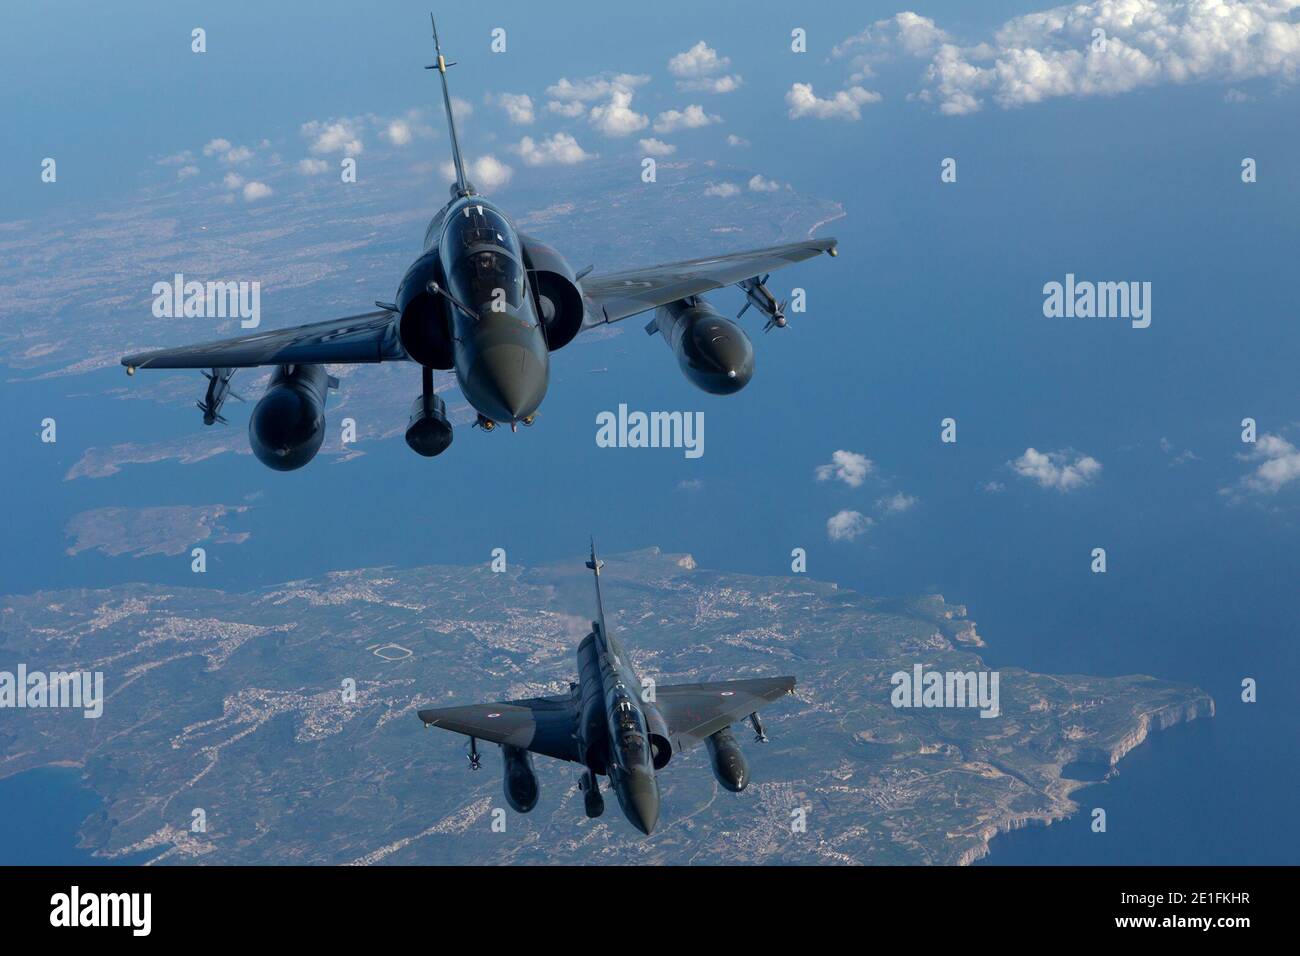 French Mirage 2000 jets fighters of the French army of Istres military base in France pictured during provisioning operation on March 23, 2011 on Harmattan mission to overfly Libya following UN Security Council resolution. Photo by ECPAD/ABACAPRESS.COM Stock Photo